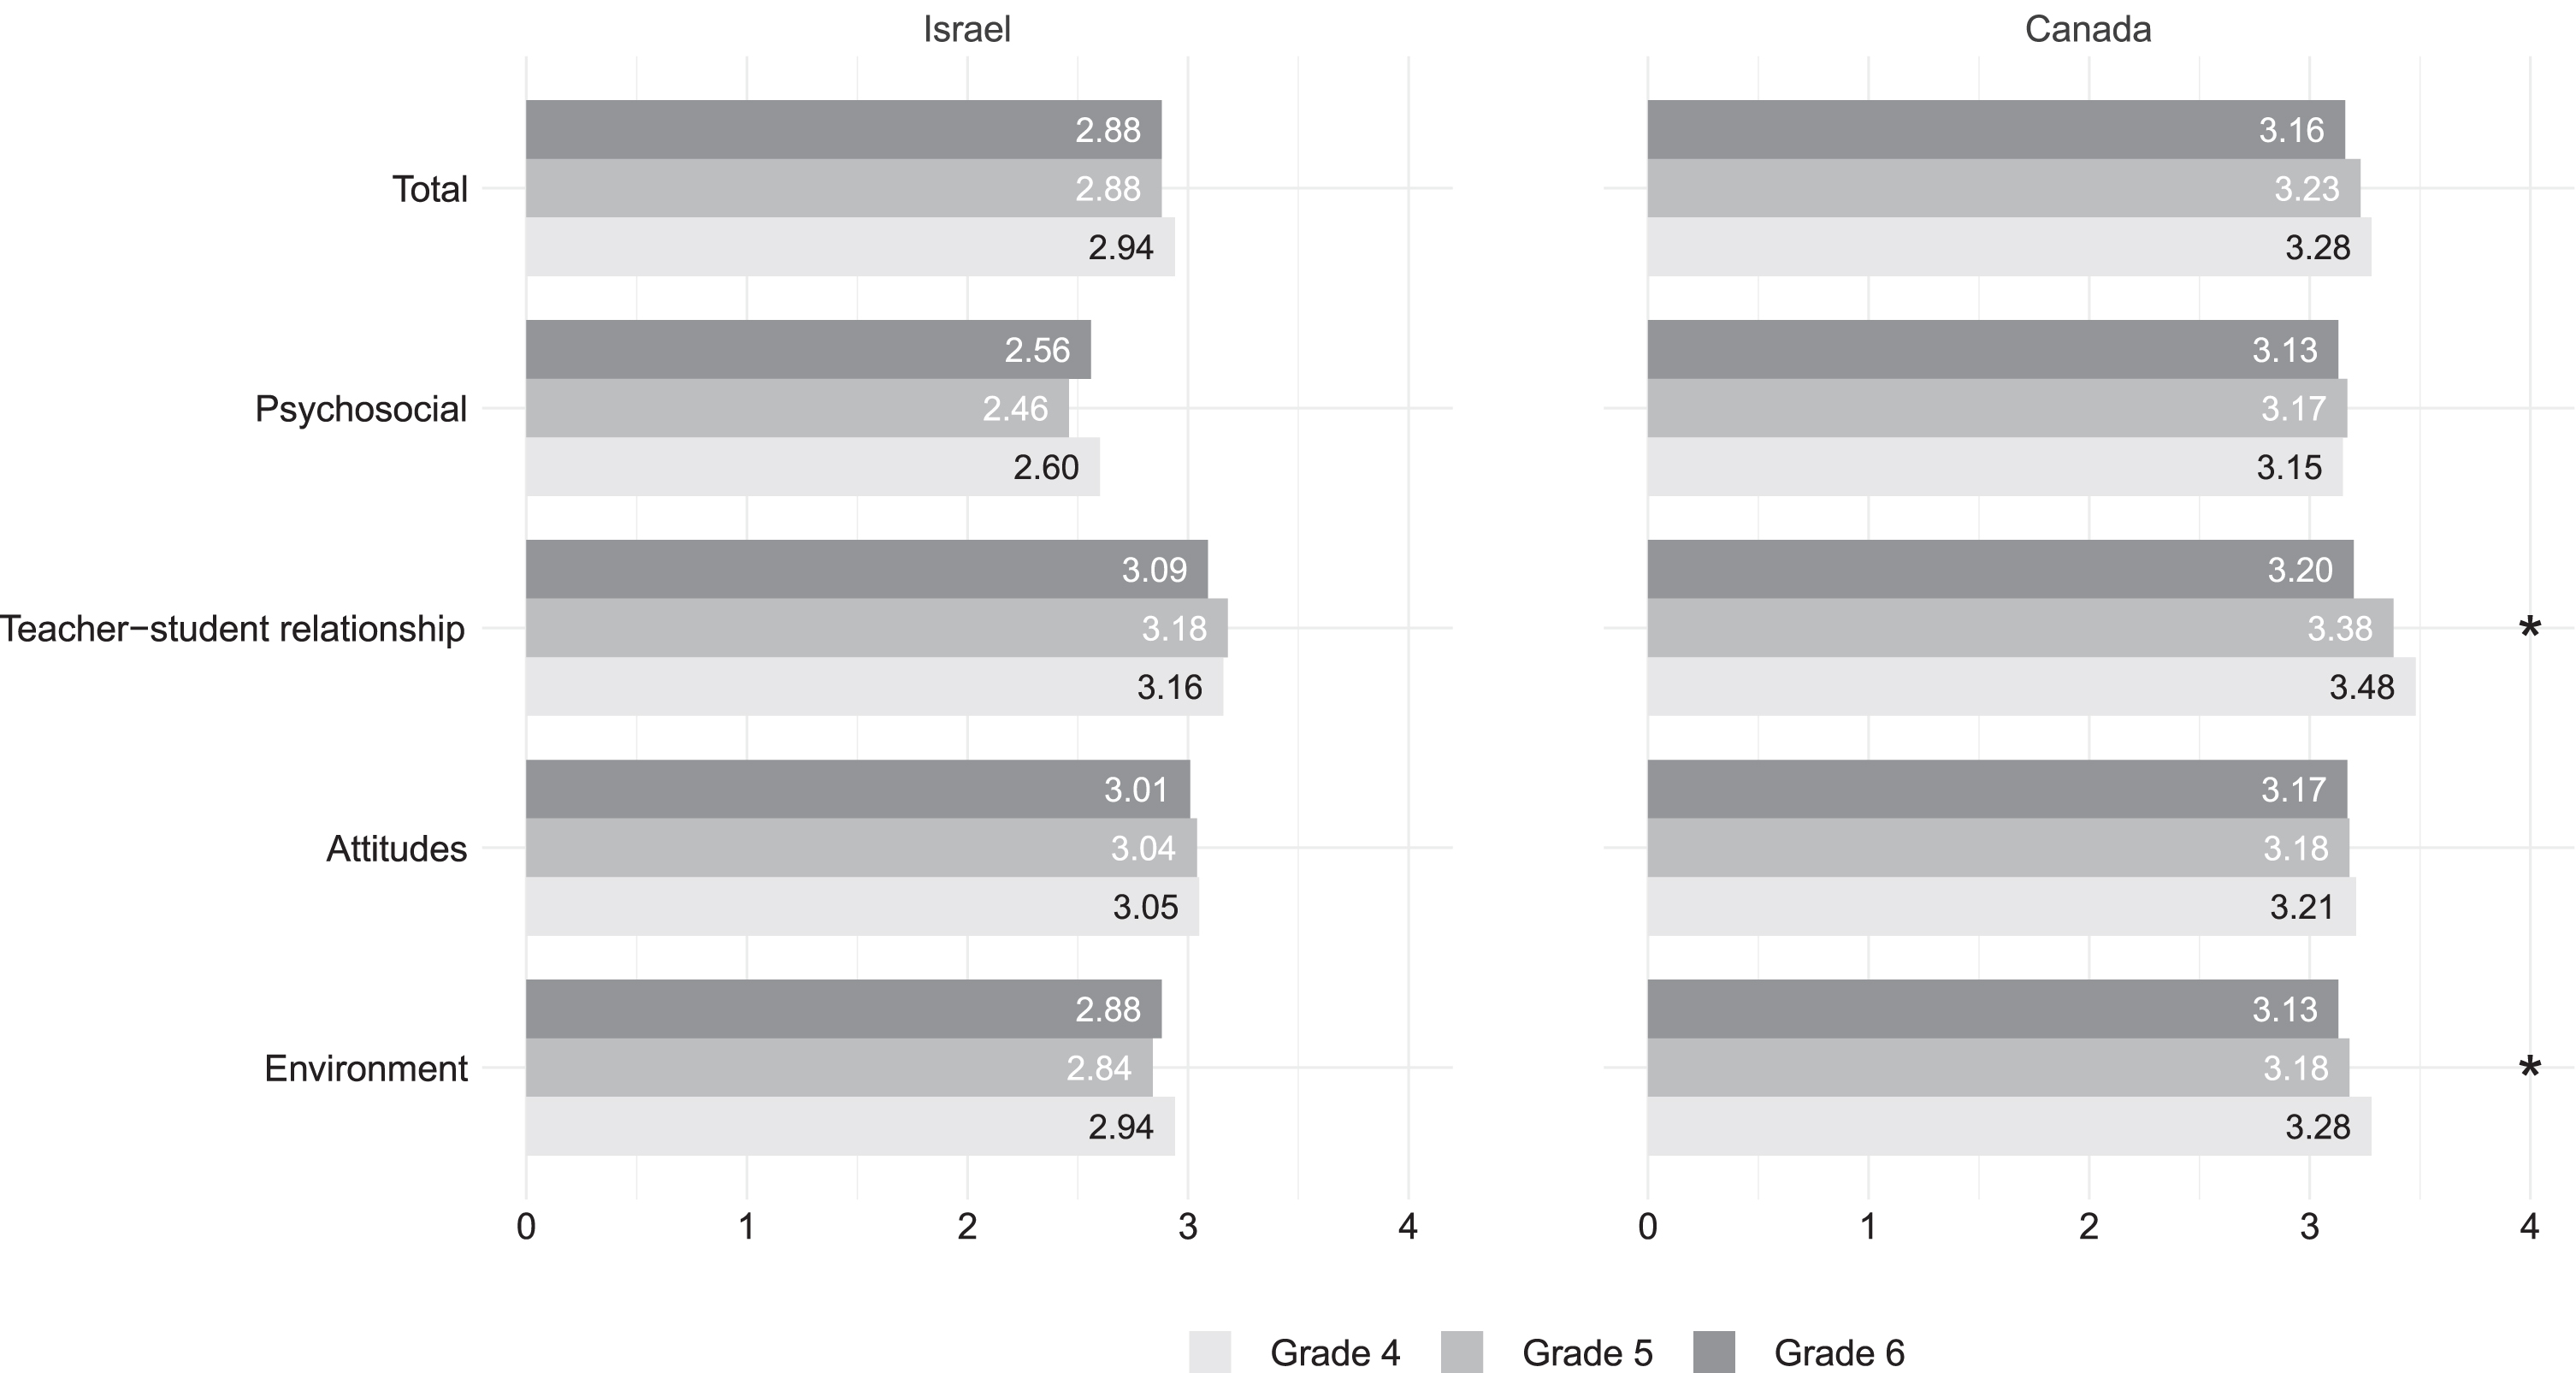 Grade differences in QoLS among Israeli and Canadian students.